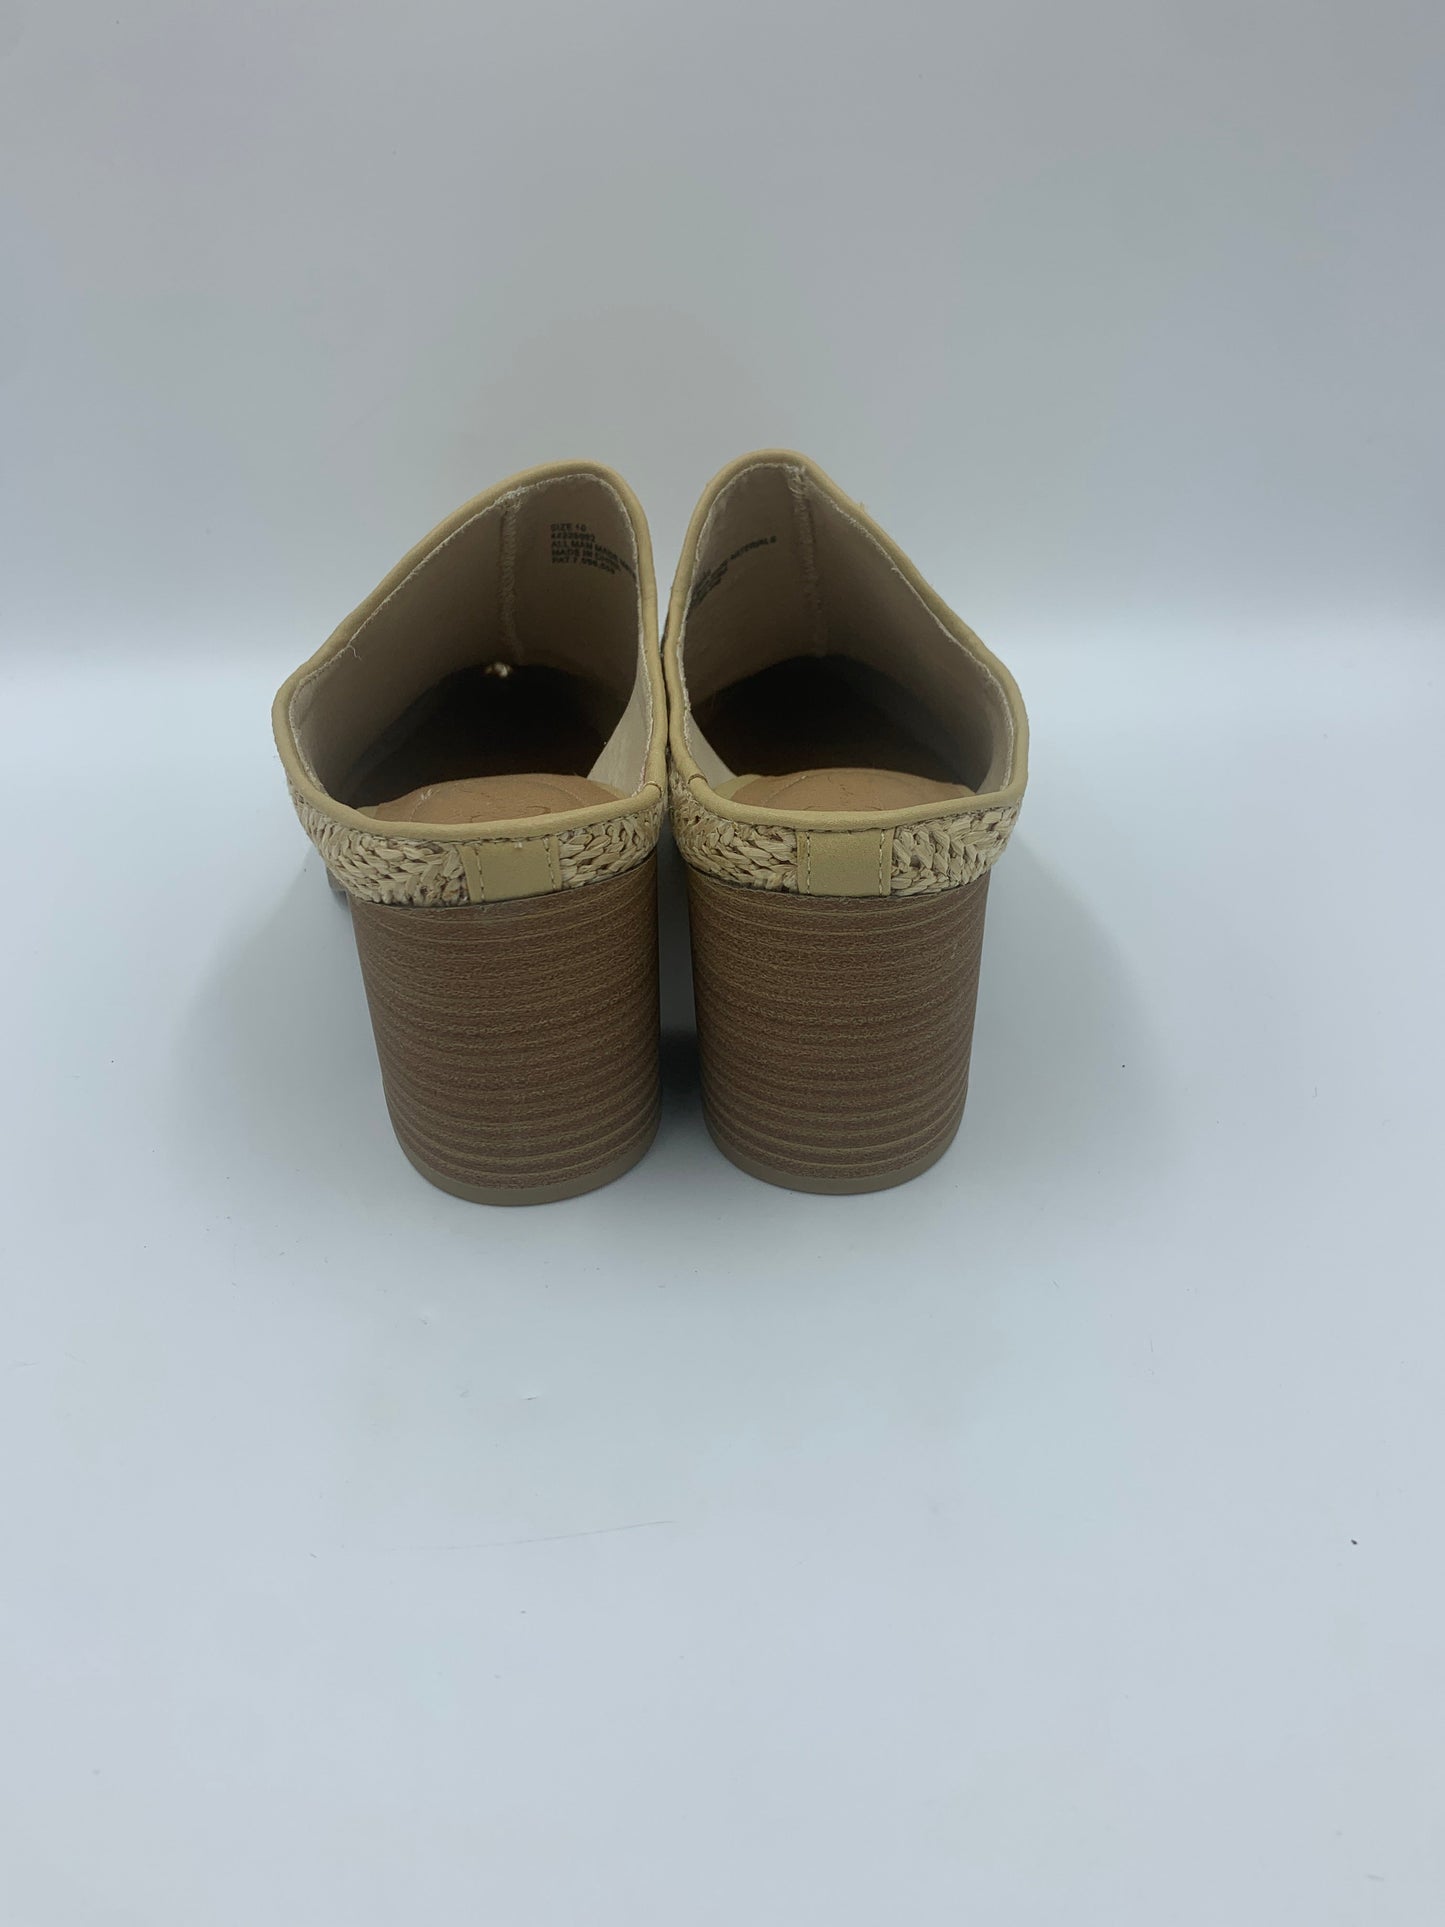 New! Tan Shoes Heels Block Cato, Size 10